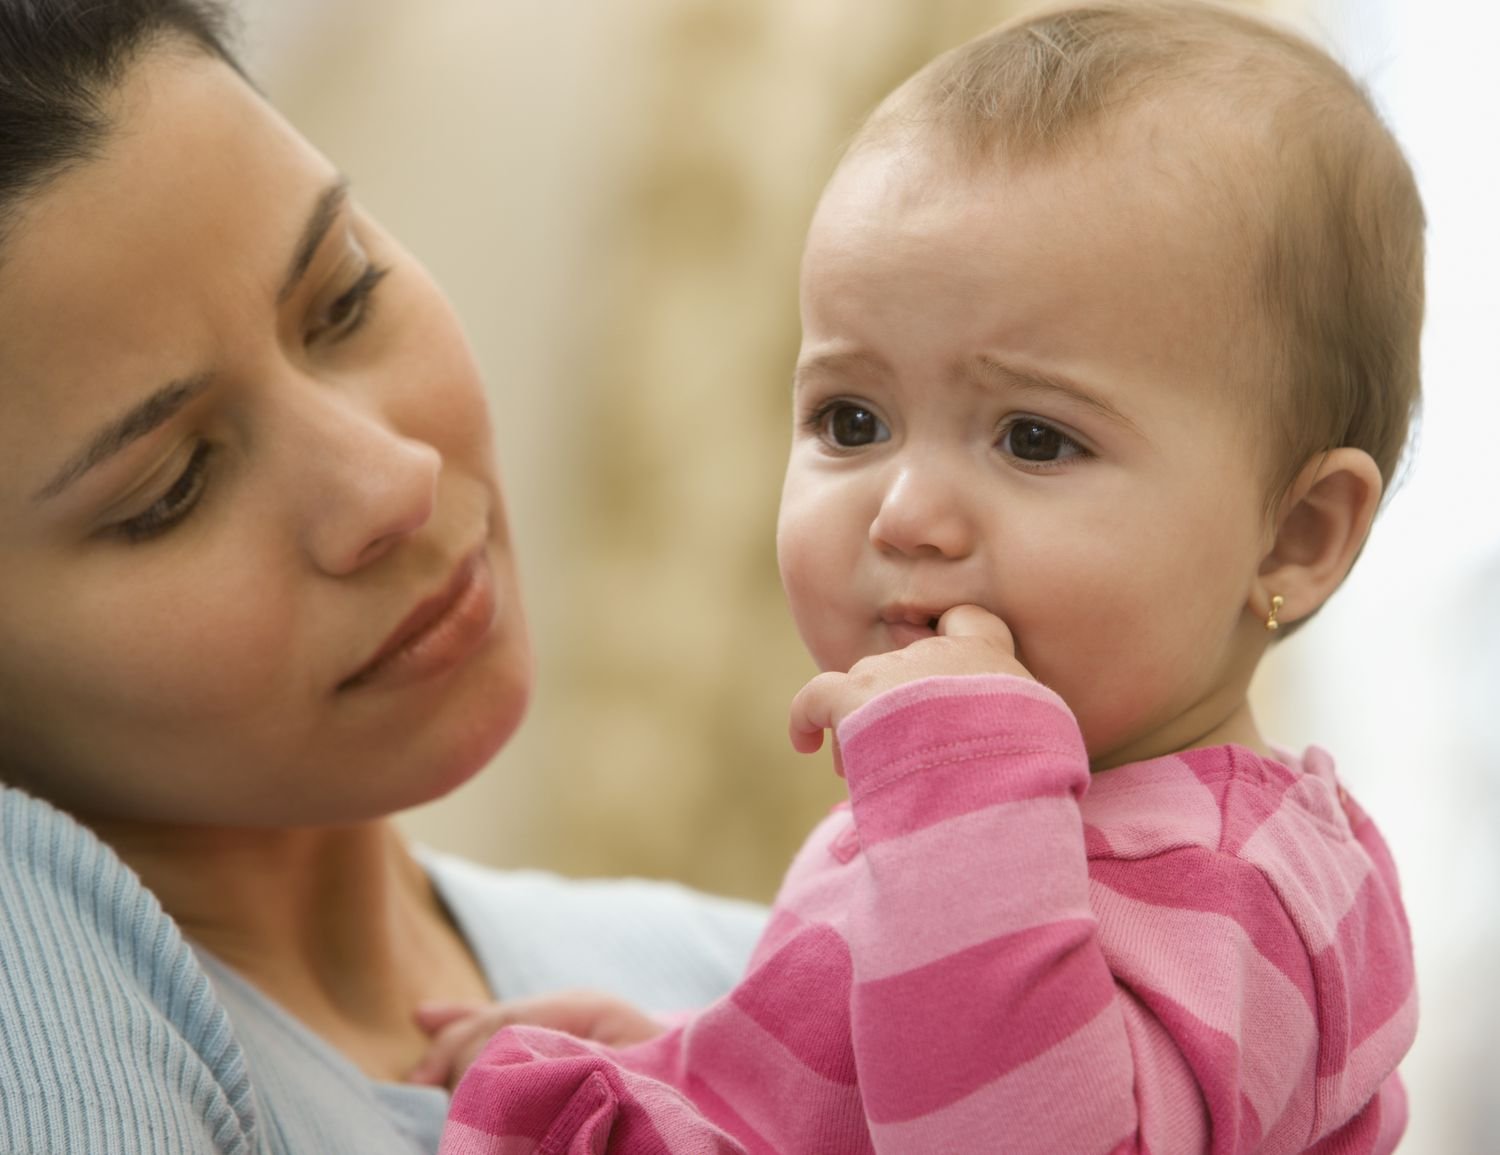 Breastfeeding While Sick? Here’s What You Need To Know About Nursing During Cold and Flu Season